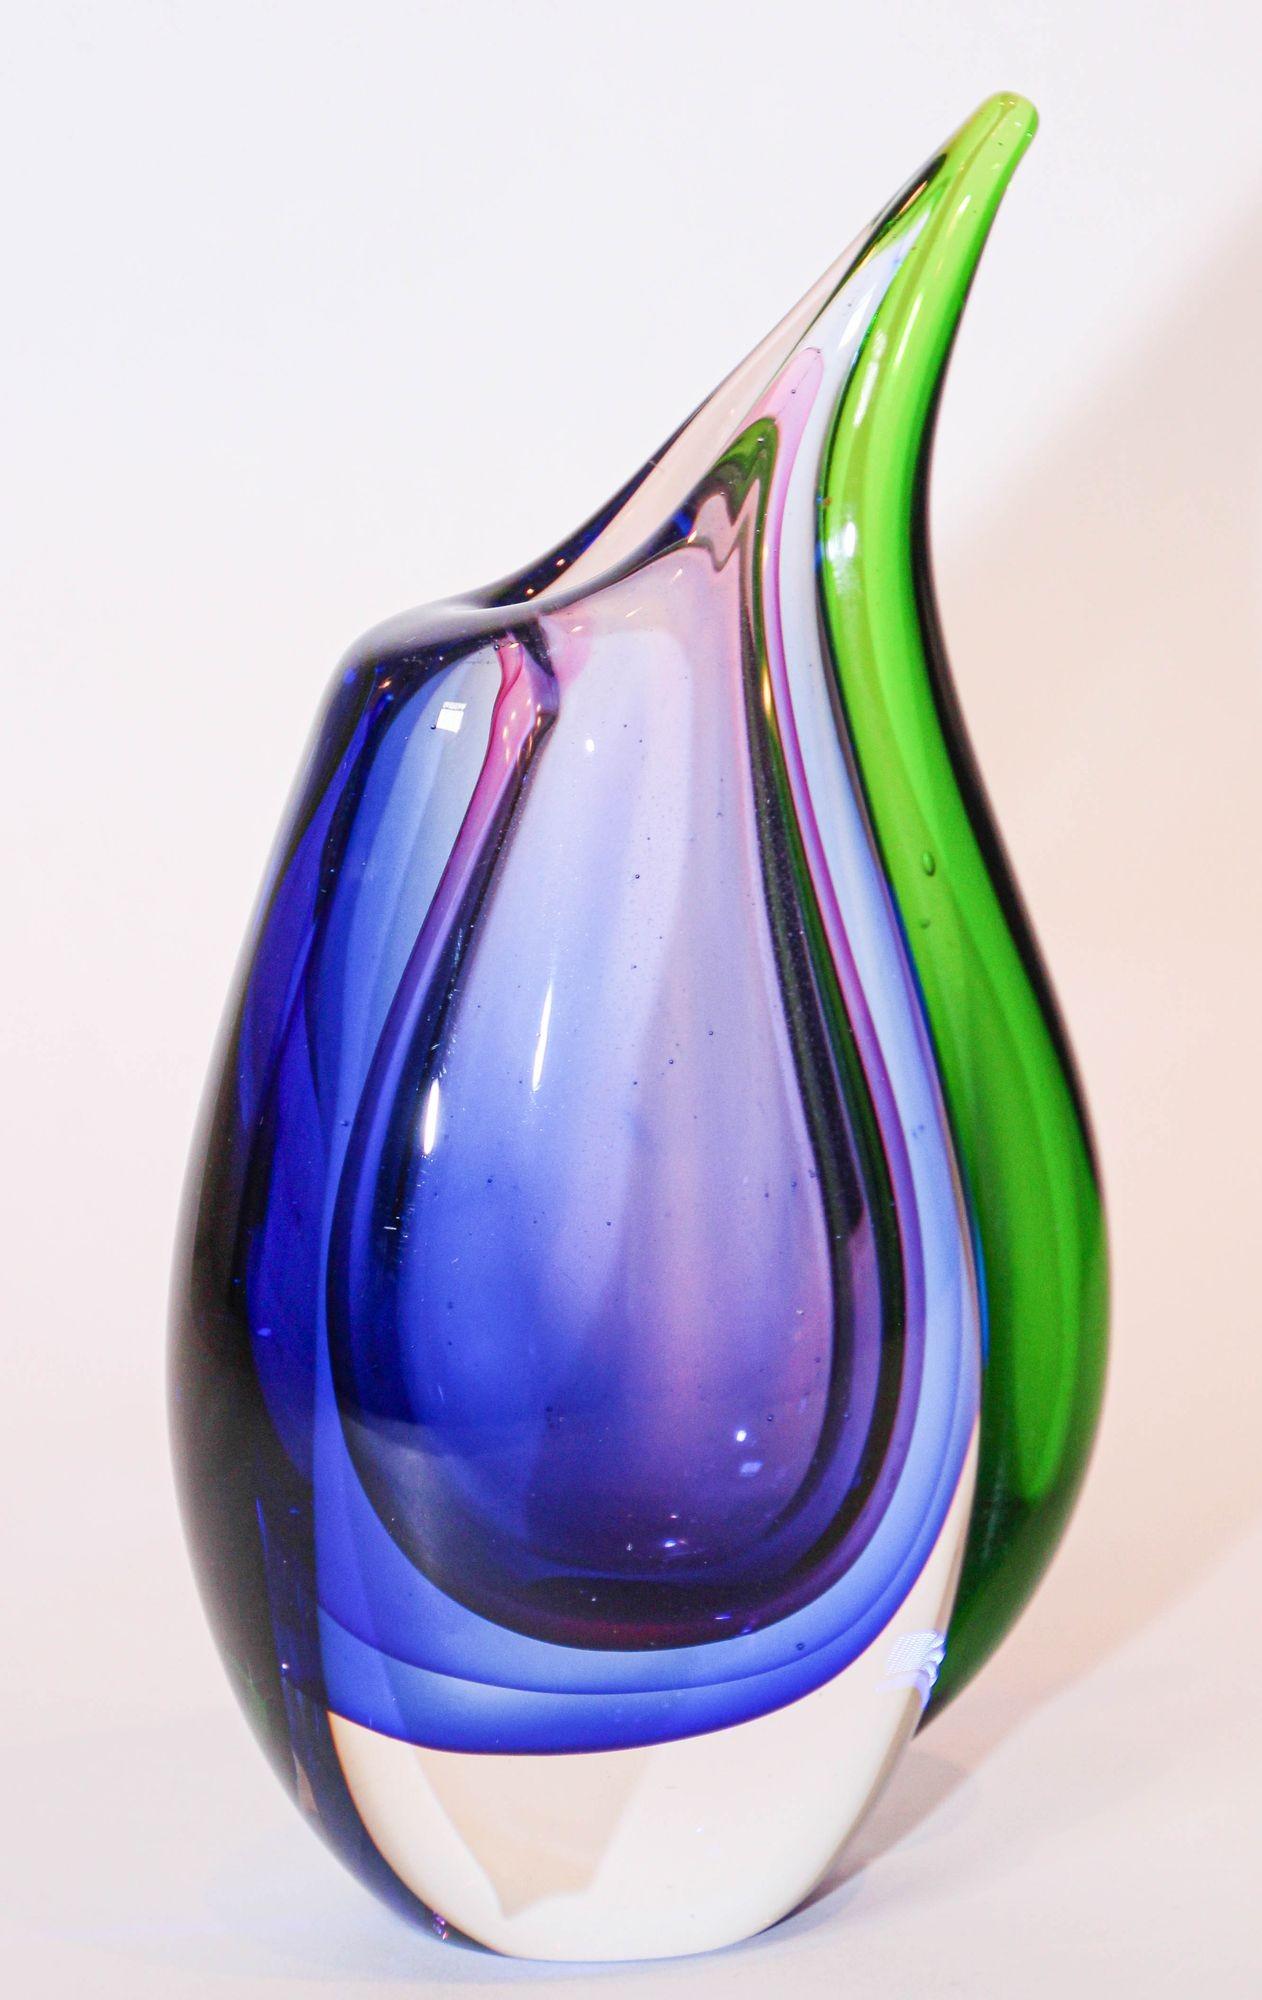 Vintage stunning hand blown art glass masterpiece with an extravagant shape.
Beautiful Design of a tear drop shape in bright vibrant intense striking rich colors in dark blue, purple and green colors hand blown and crafted entirely by hand using